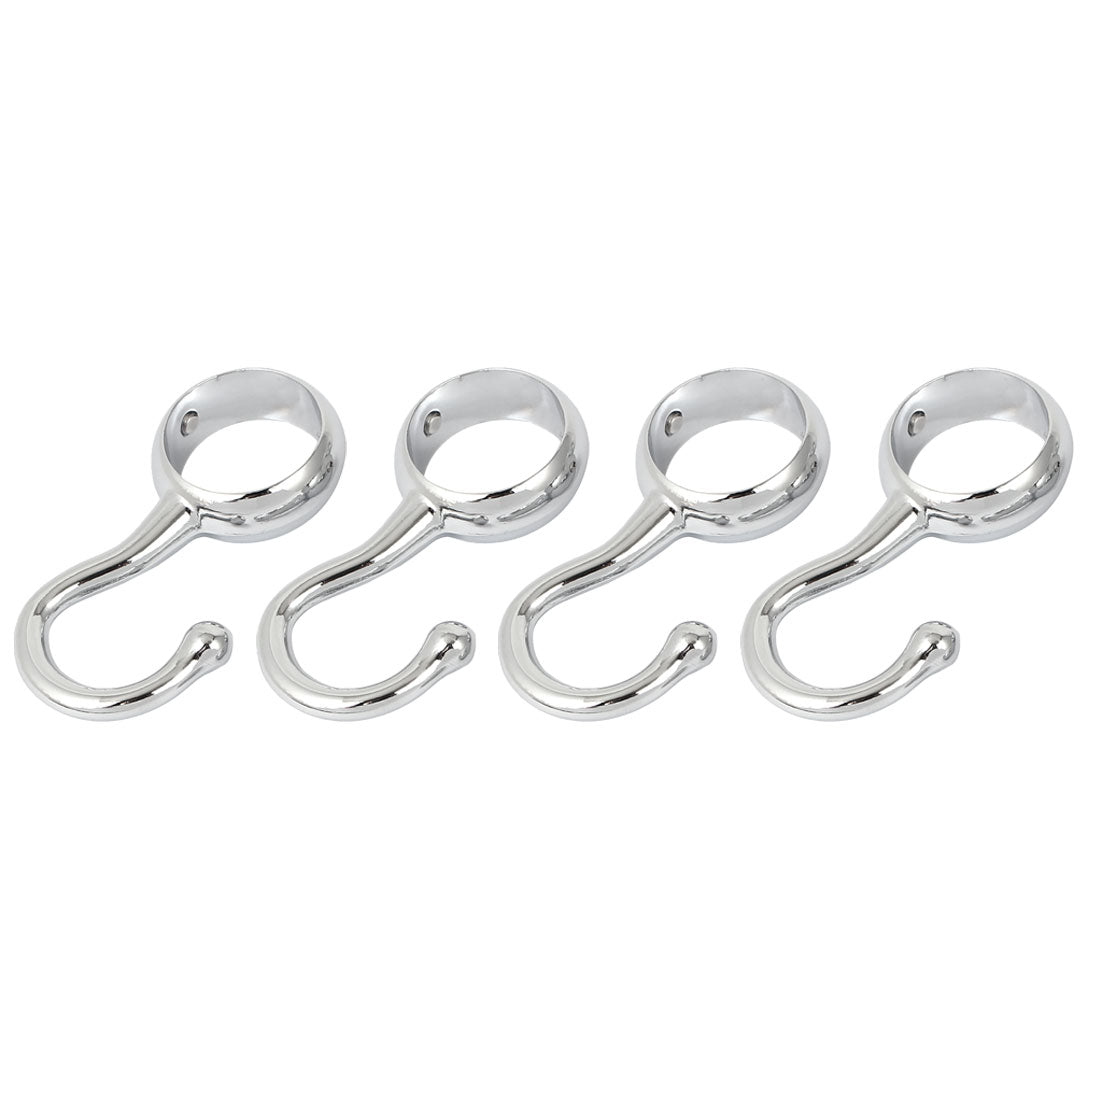 uxcell Uxcell 25mm Dia Round Tube Wardrobe Hanging Clothes Garment Rail Hanger Hook 4pcs